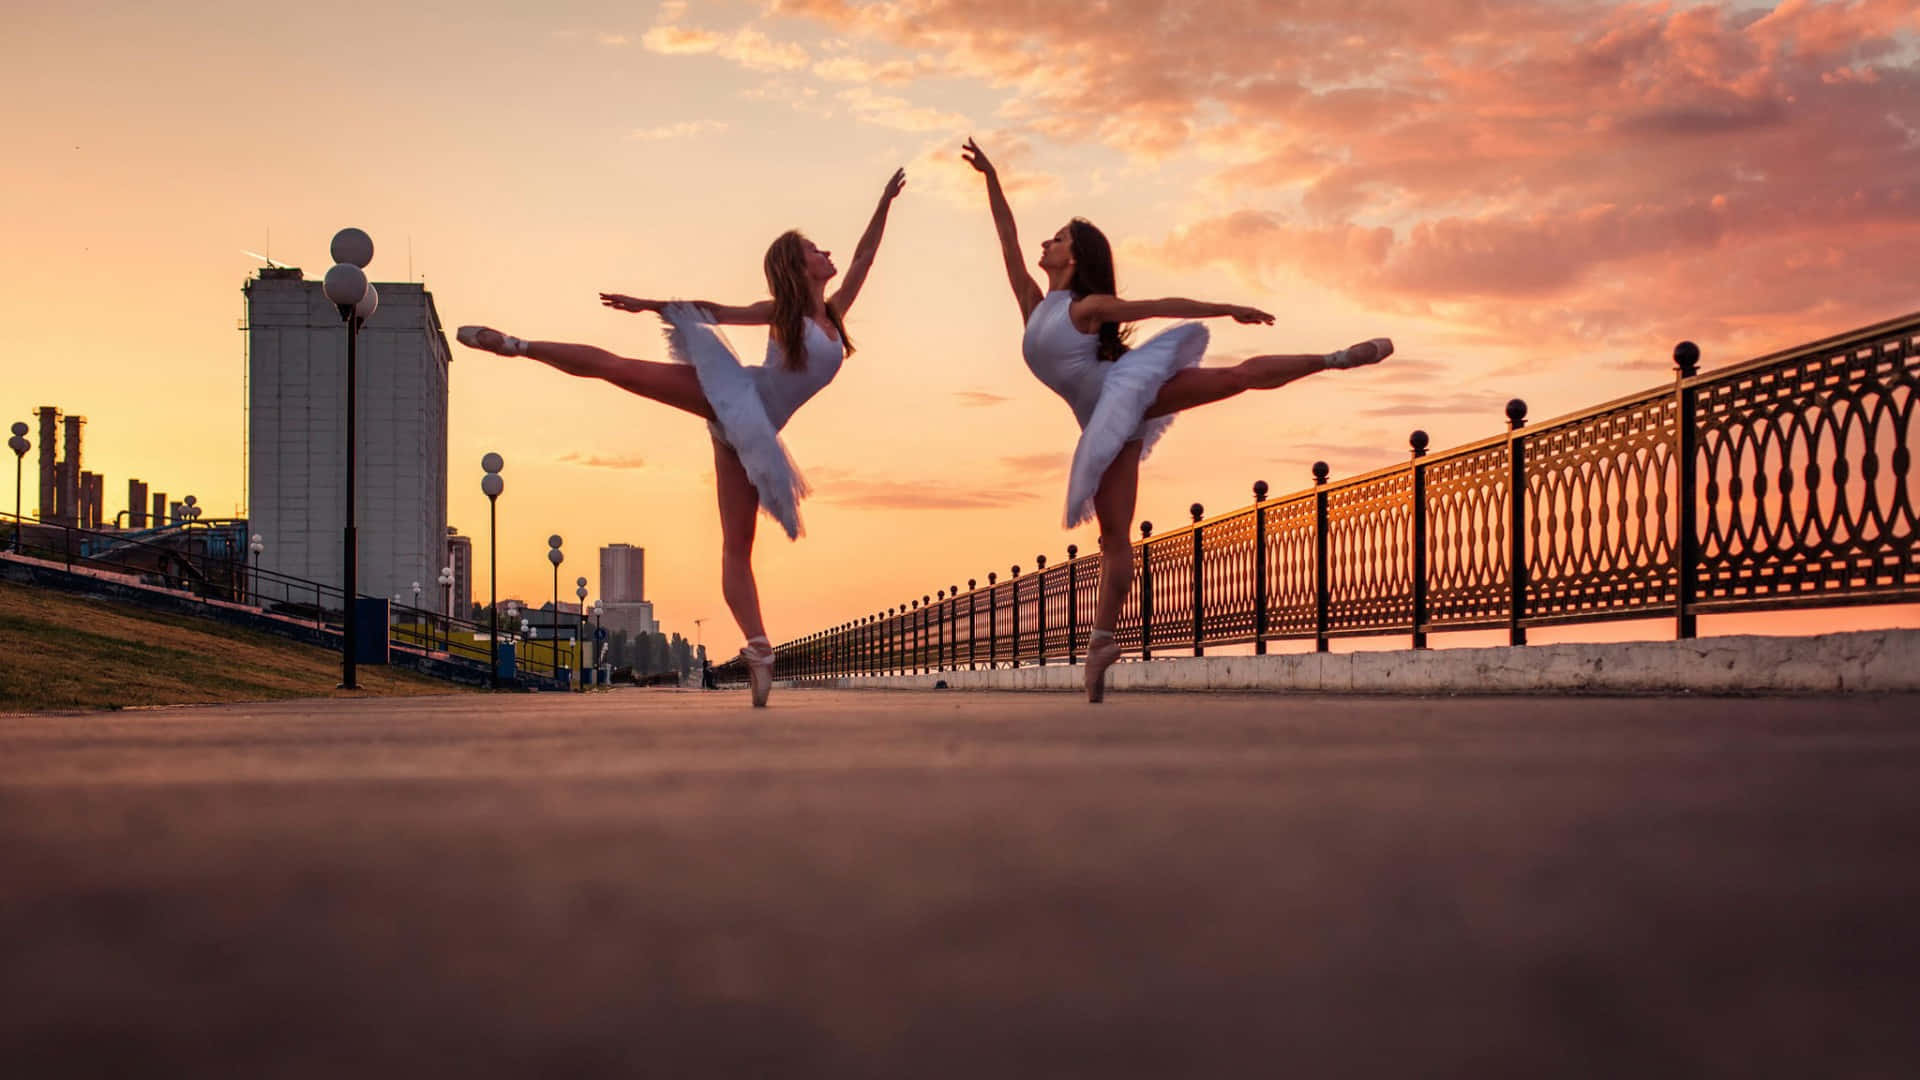 Two Ballerinas Are Dancing On The Street At Sunset